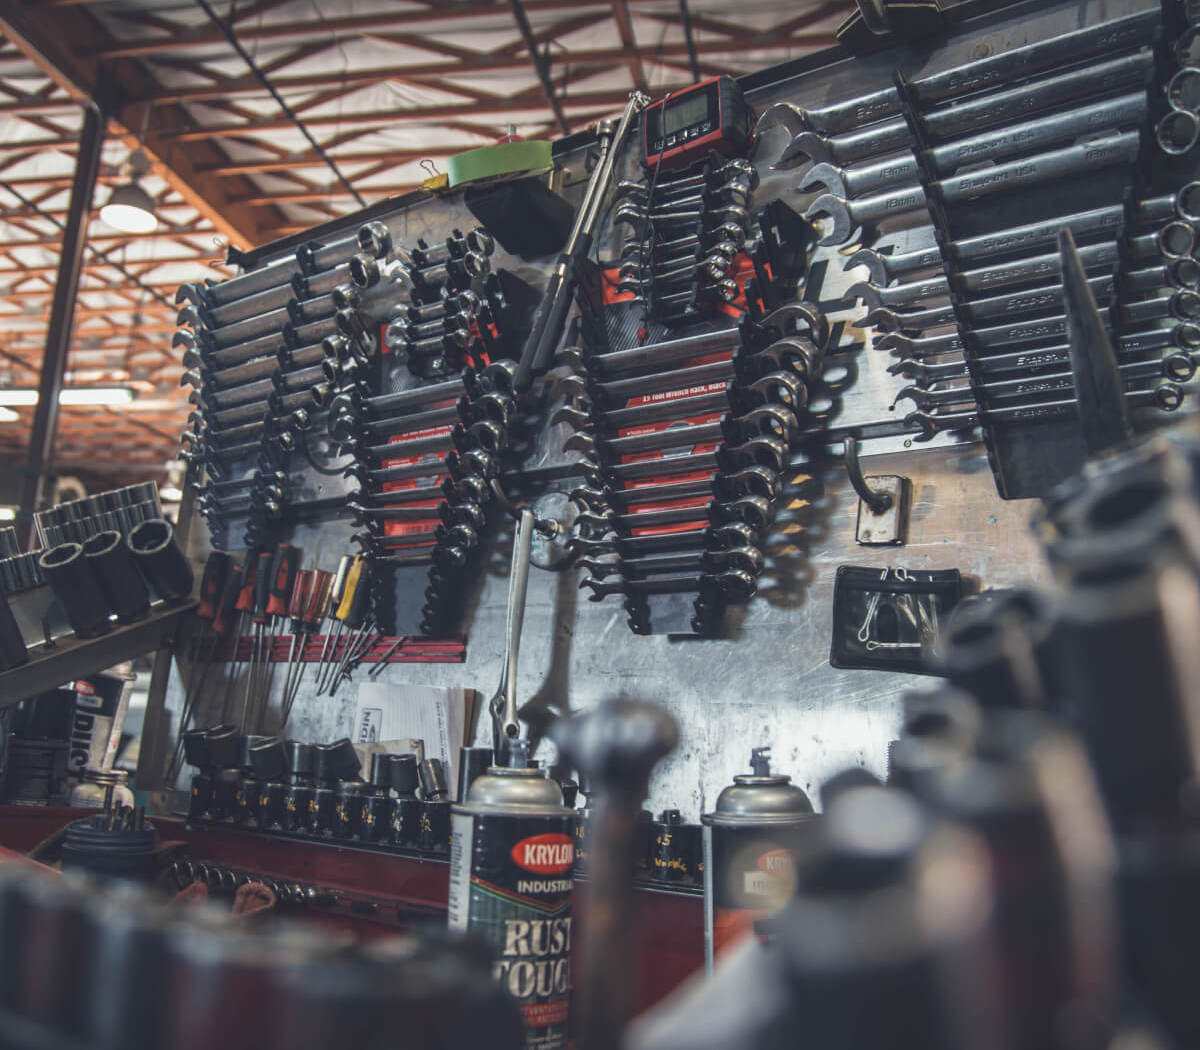 5 Auto Repair Marketing Ideas to Capture Leads and Loyalty